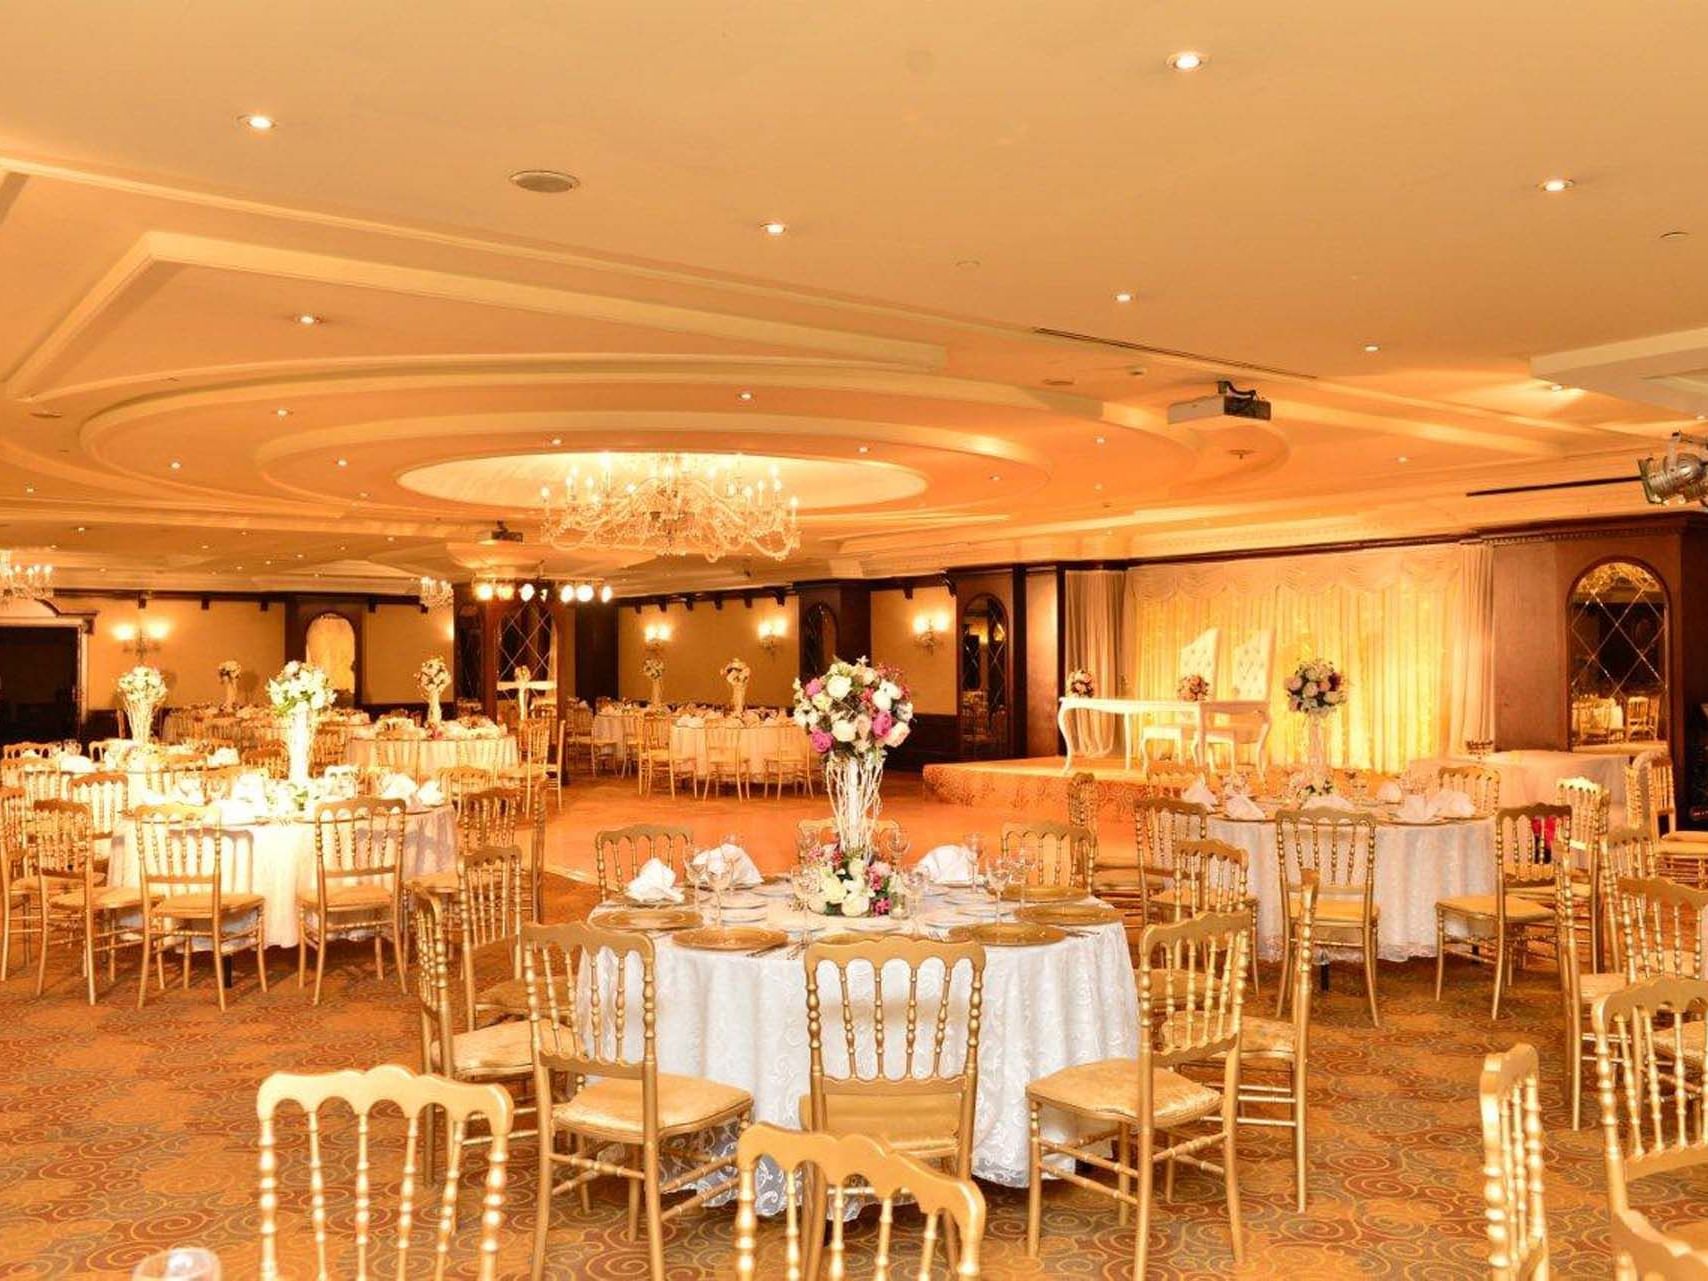 Istanbul wedding venue - Eresin Hotels Topkapı boasts a magnificent hall adorned with crystals.